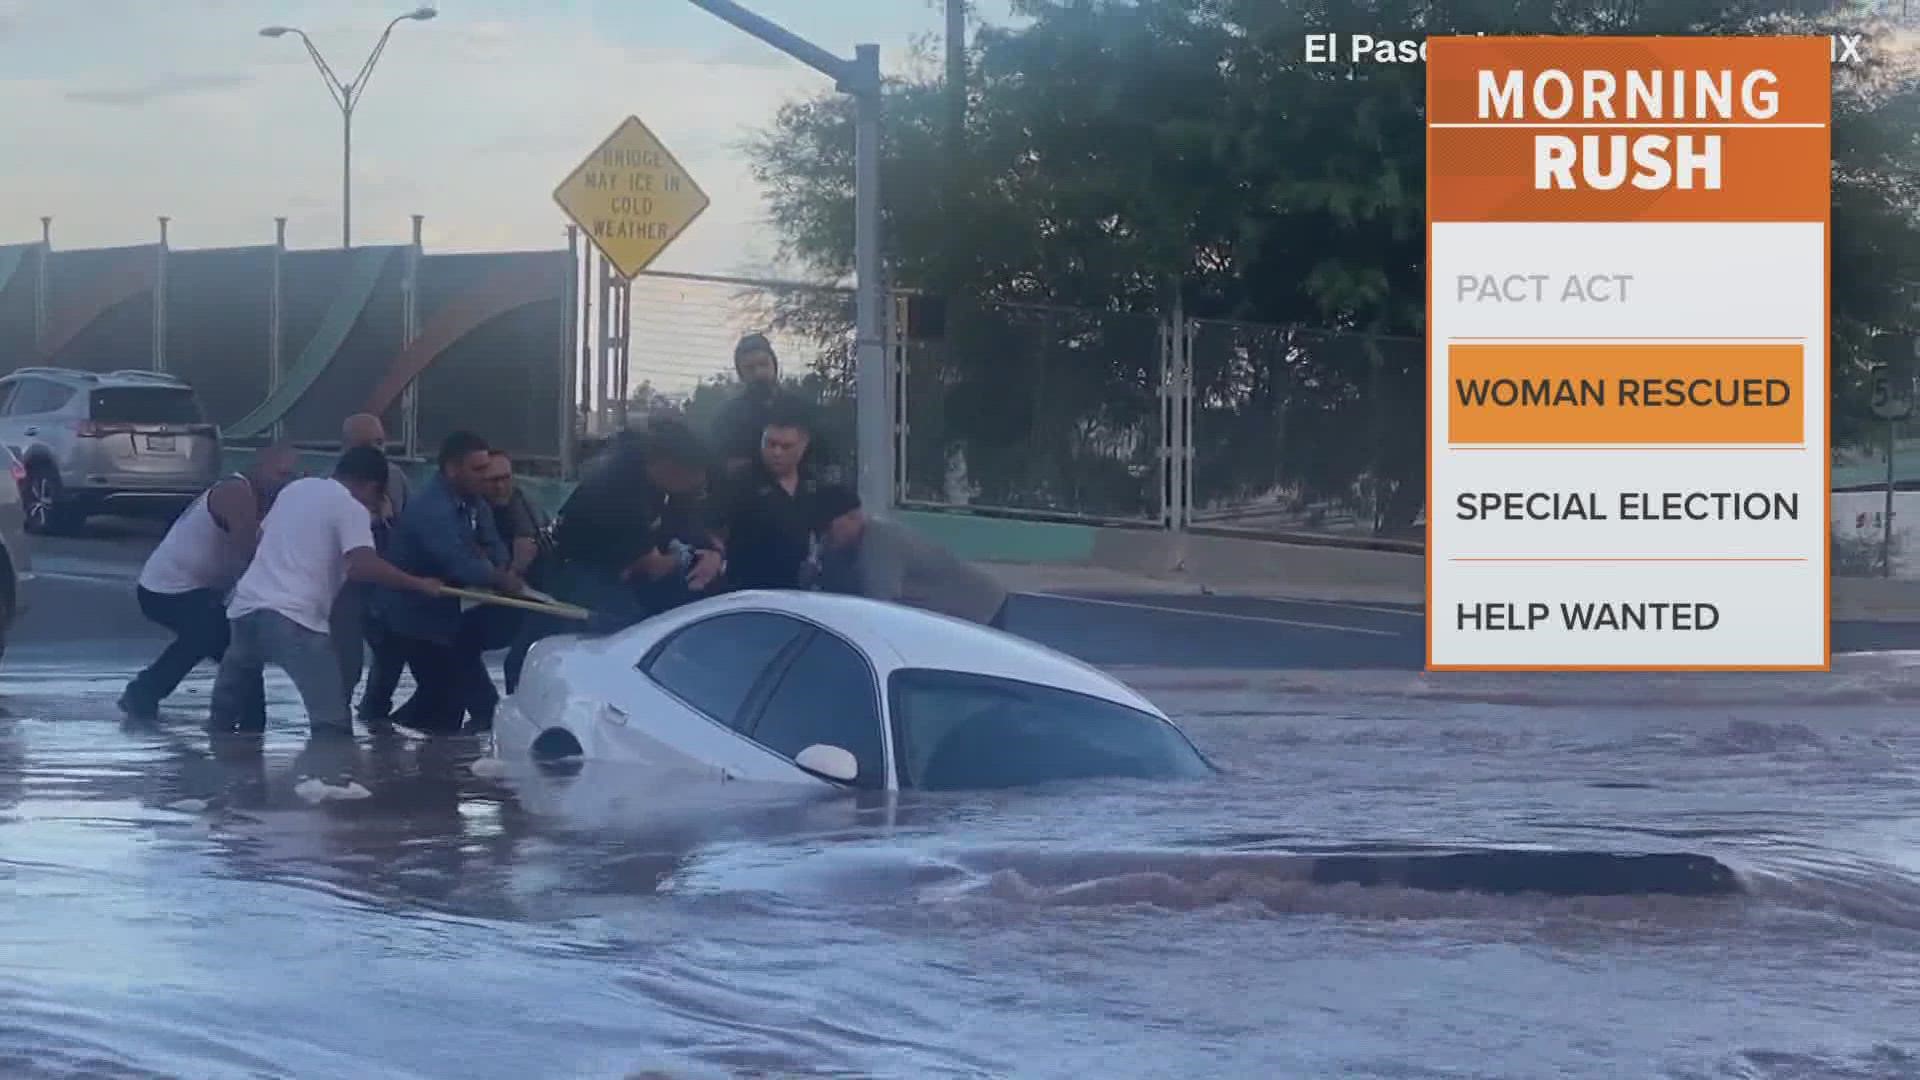 An El Paso sinkhole caused by water main break pressure swallows up a car with a woman still inside the vehicle.